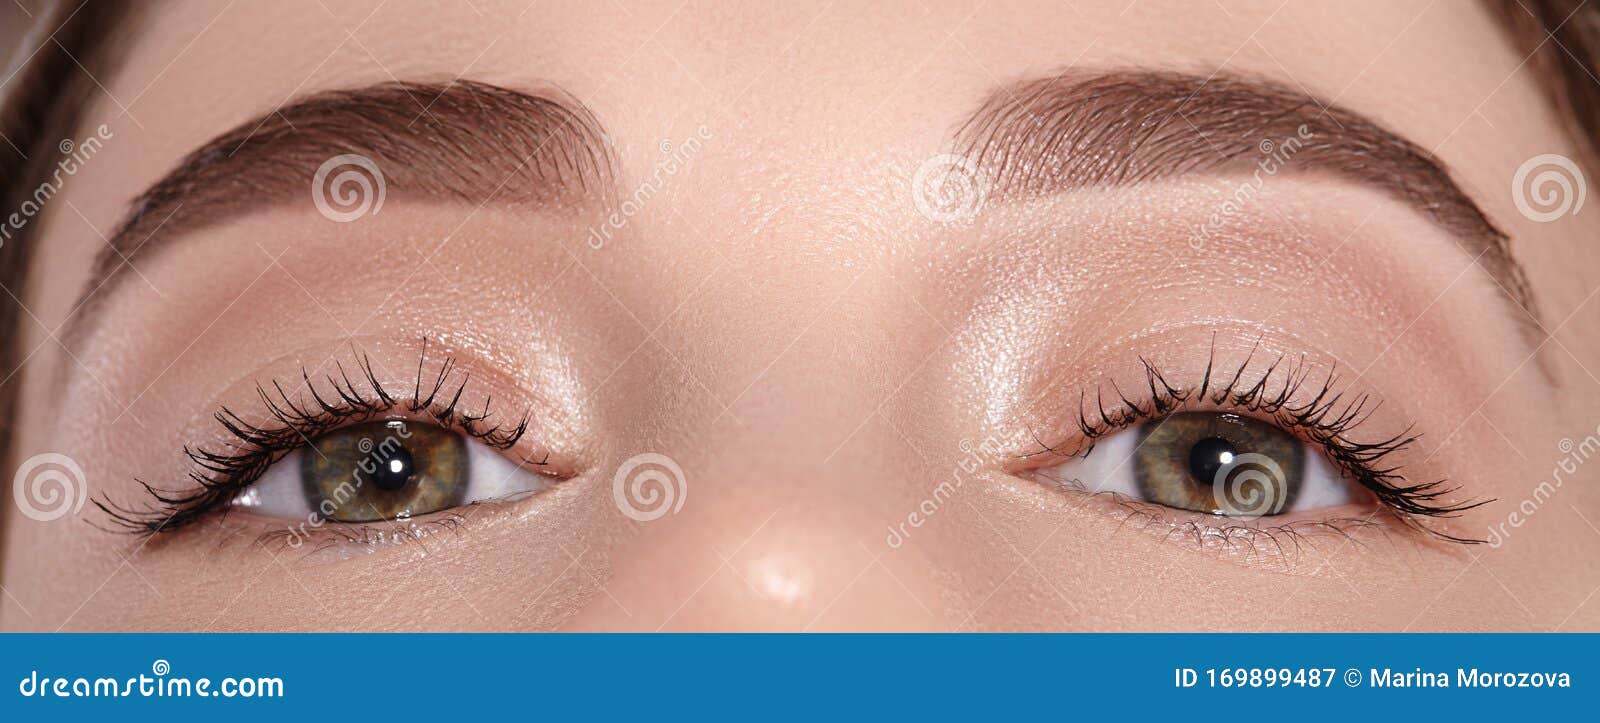 beautiful eye with perfect  eyebrows. clean skin, naturel make-up. good vision. permanent makeup on eye brows